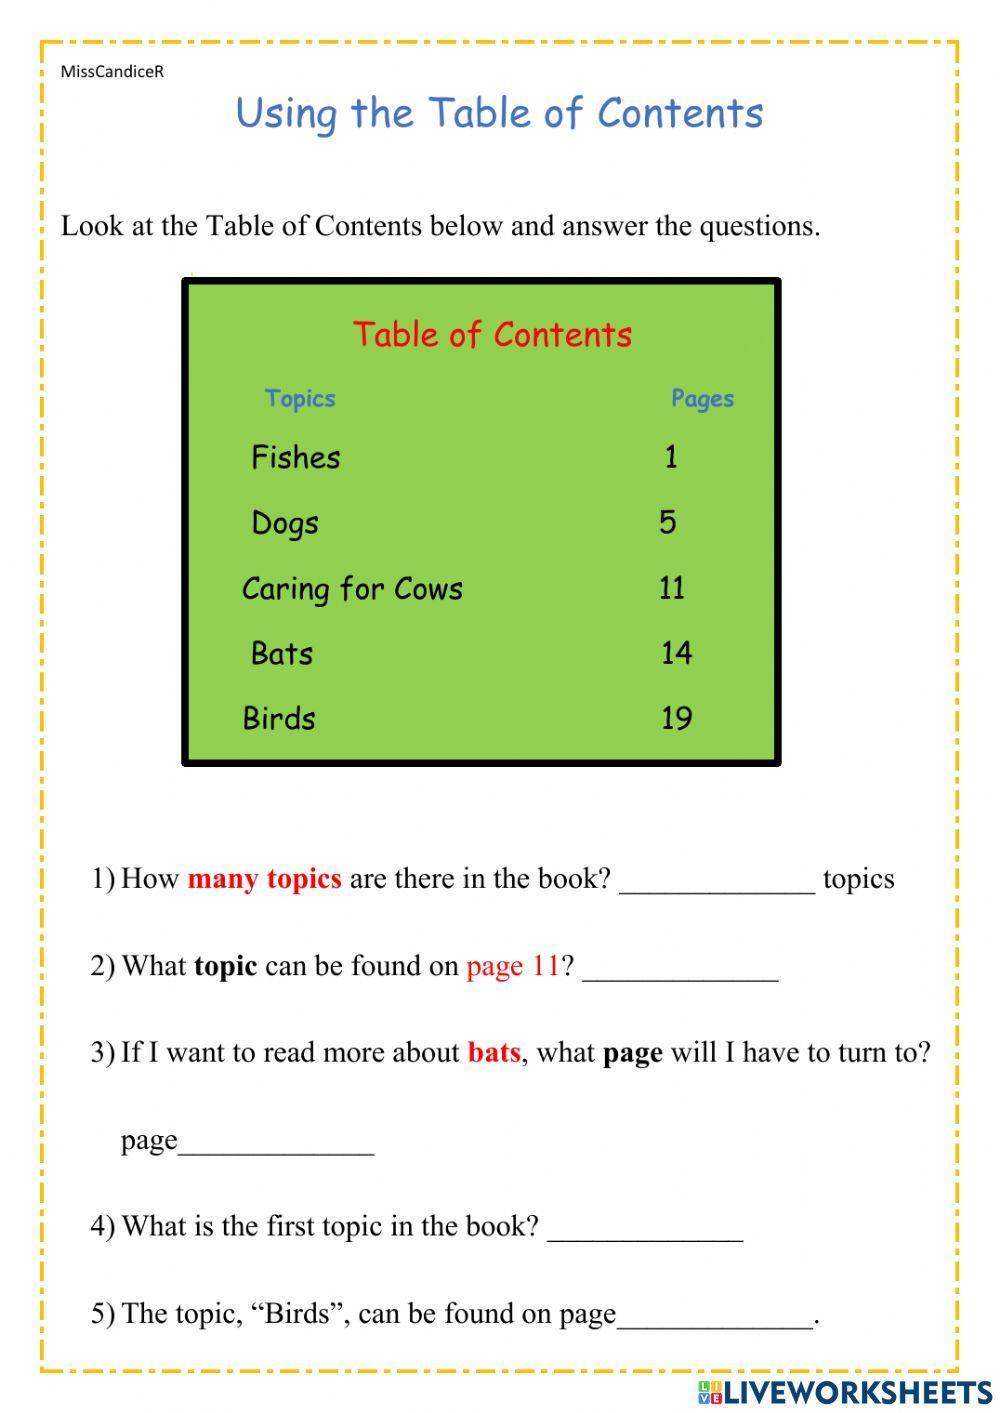 Using the Table of Contents